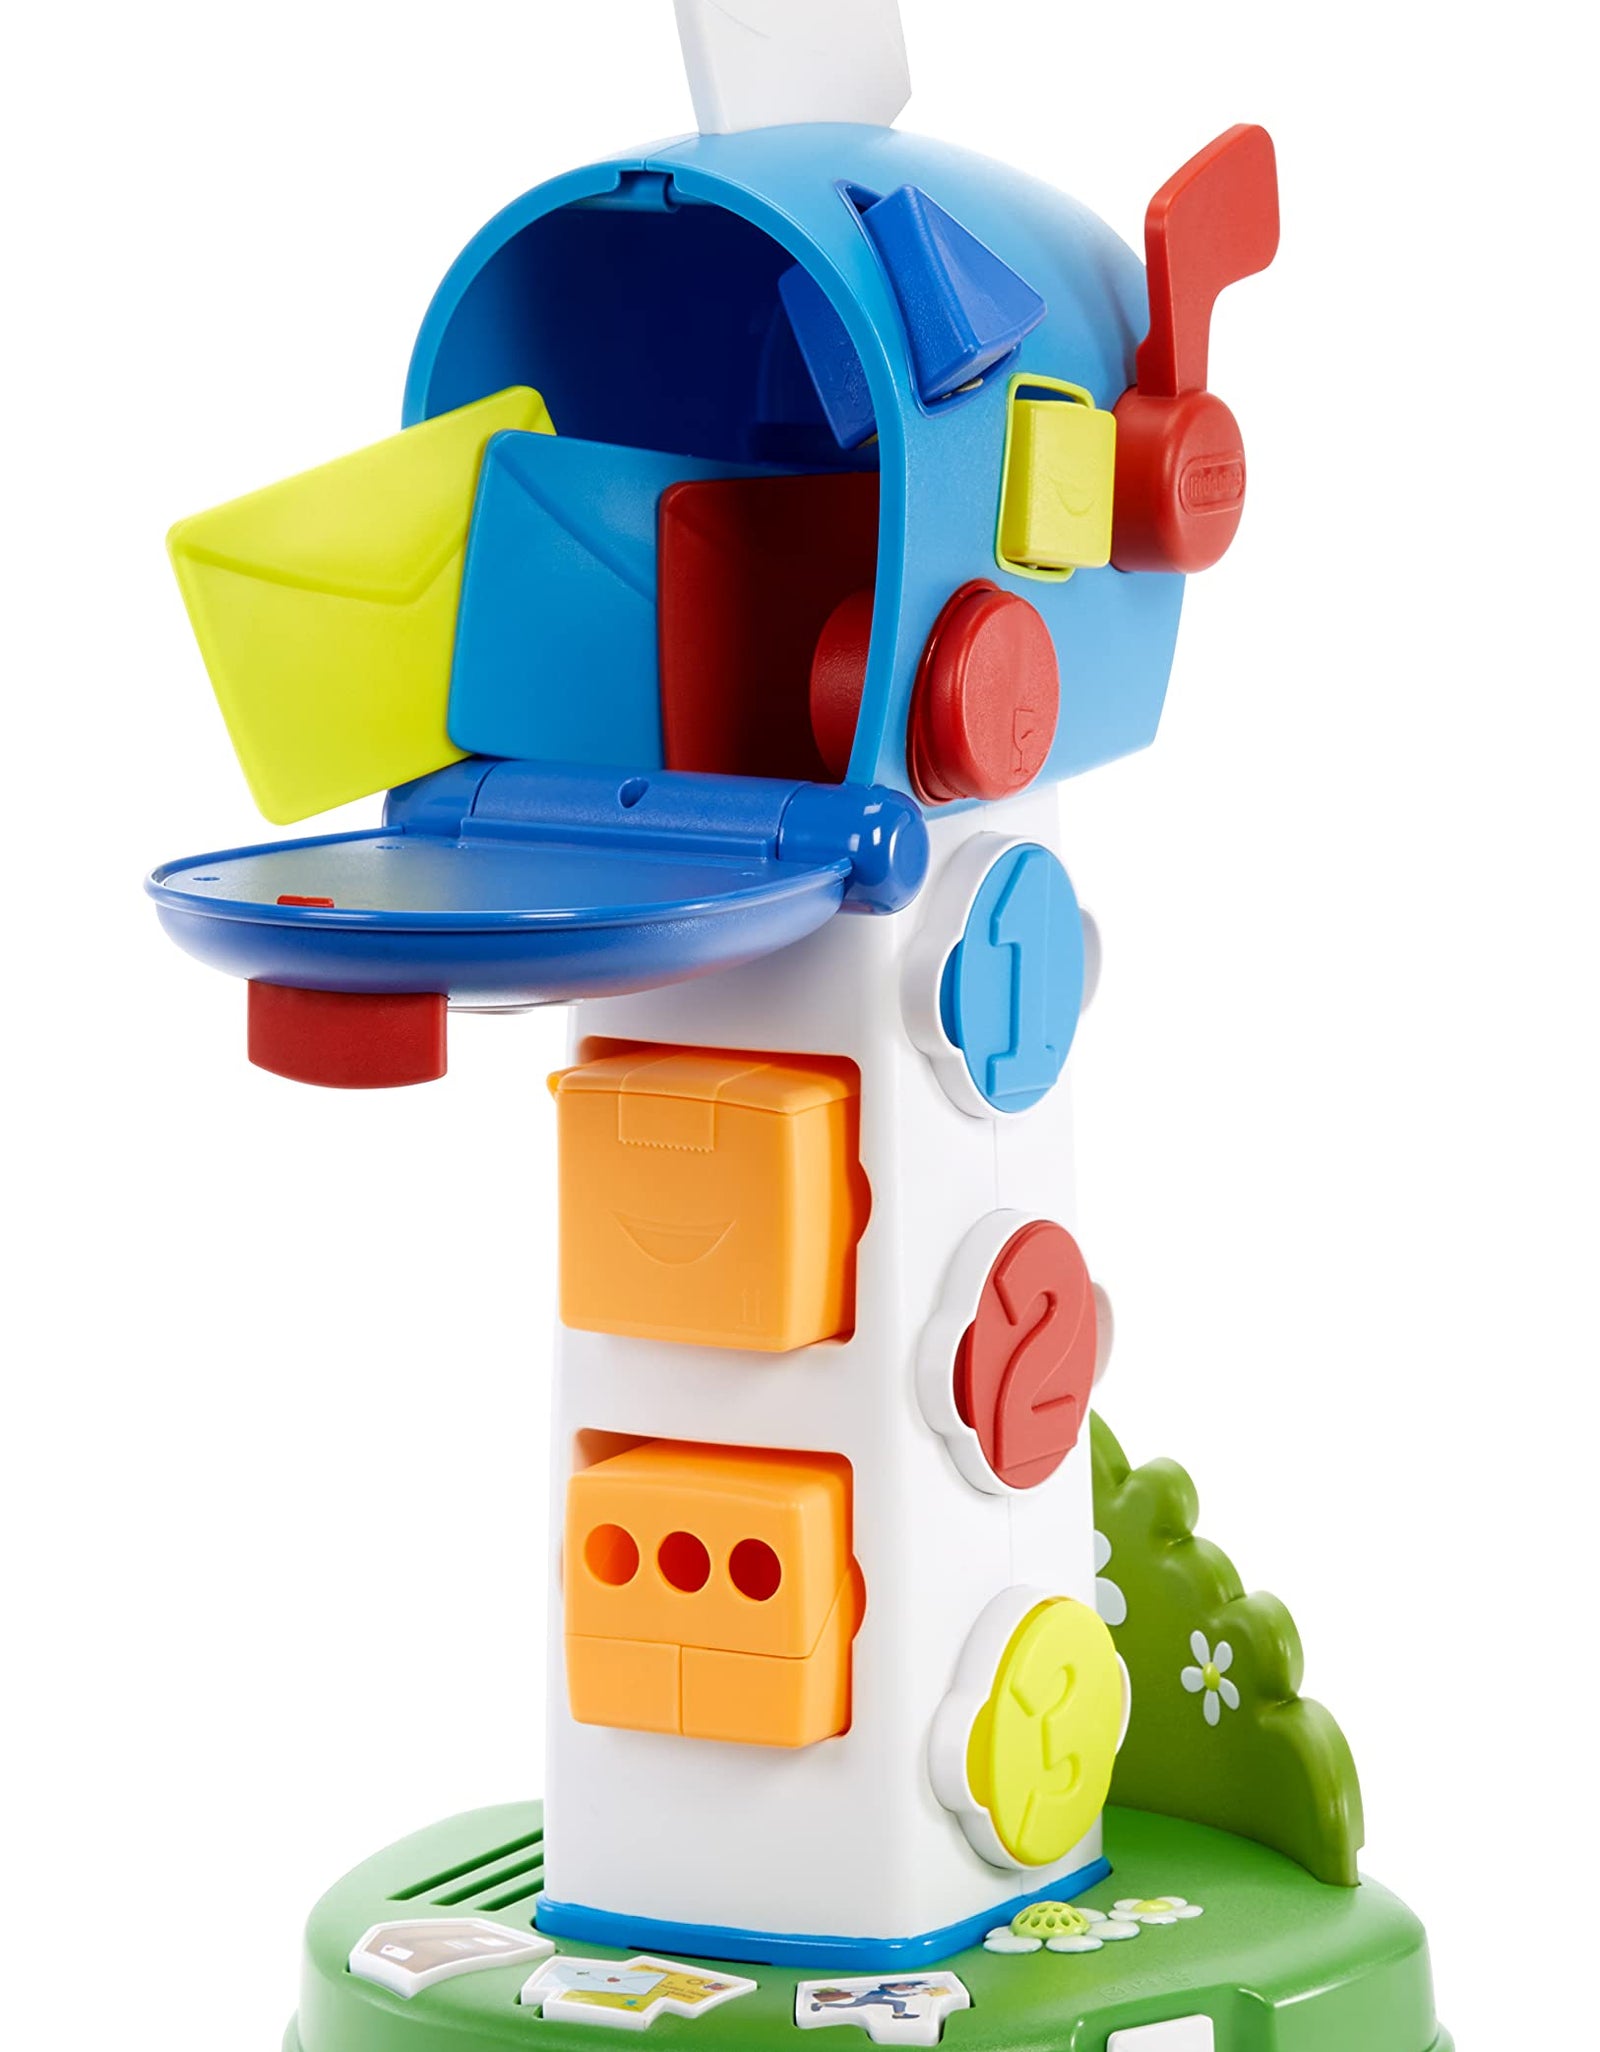 Little Tikes Learn & Play My First Learning Mailbox with Colors, Shapes and Numbers Learning and Pretend Play, Including Accessories, Gift for Babies Toddlers Girls Boys Age 12 months 1 2 3+ Years Old